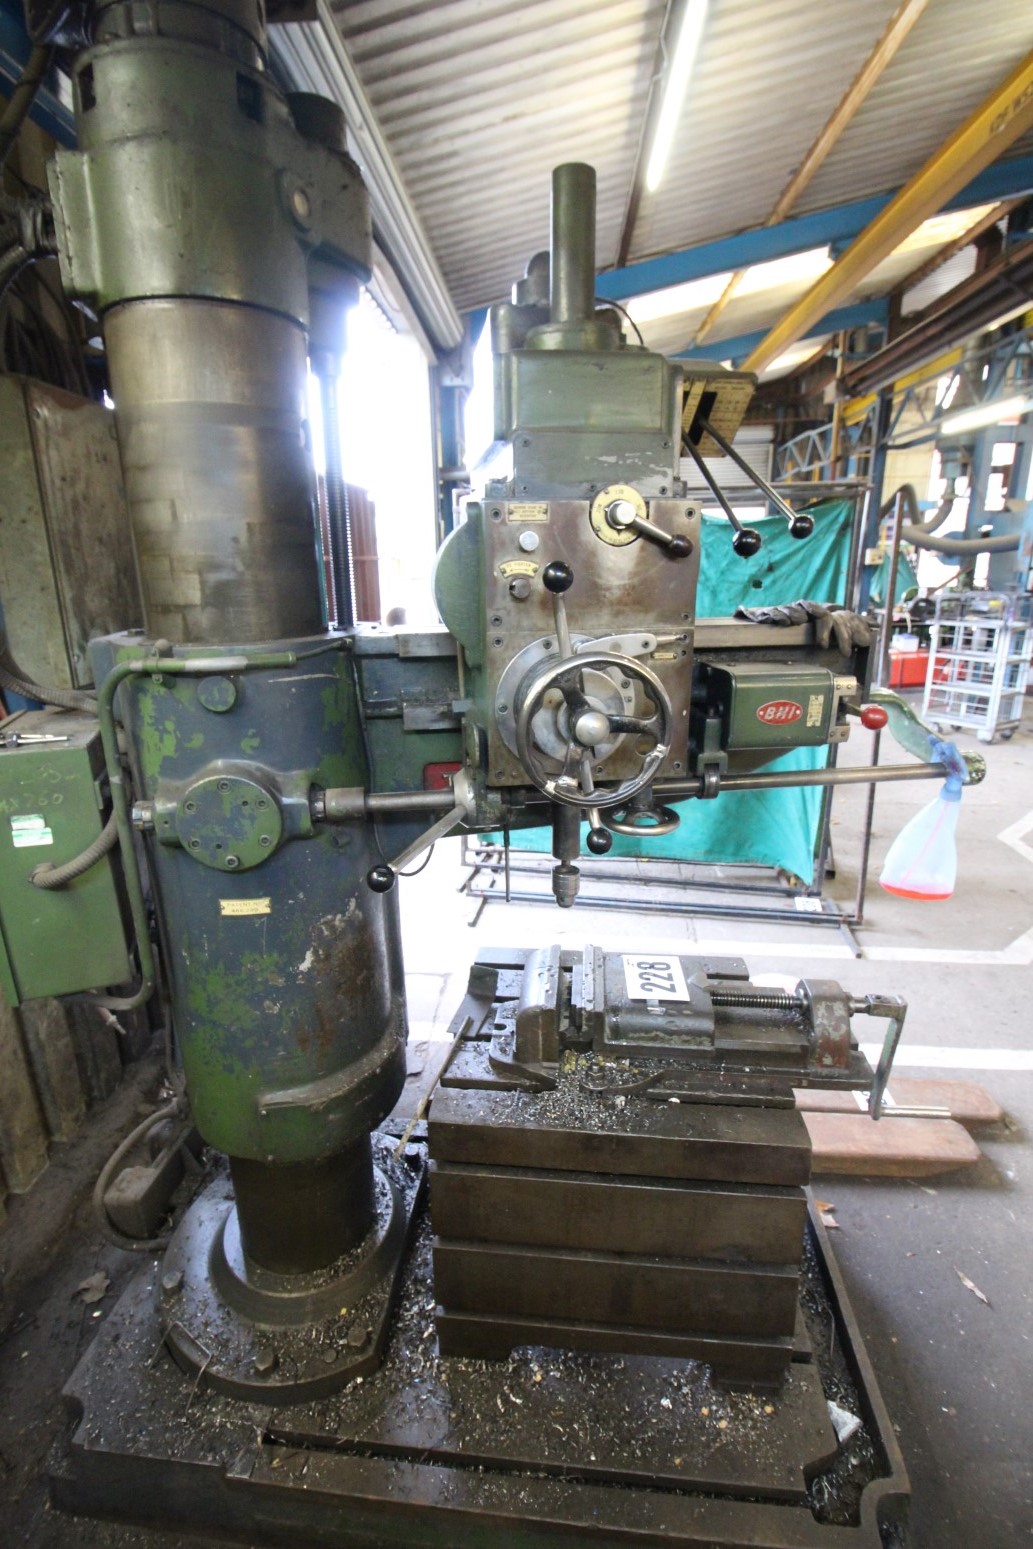 TOWN RADIAL ARM DRILL £820